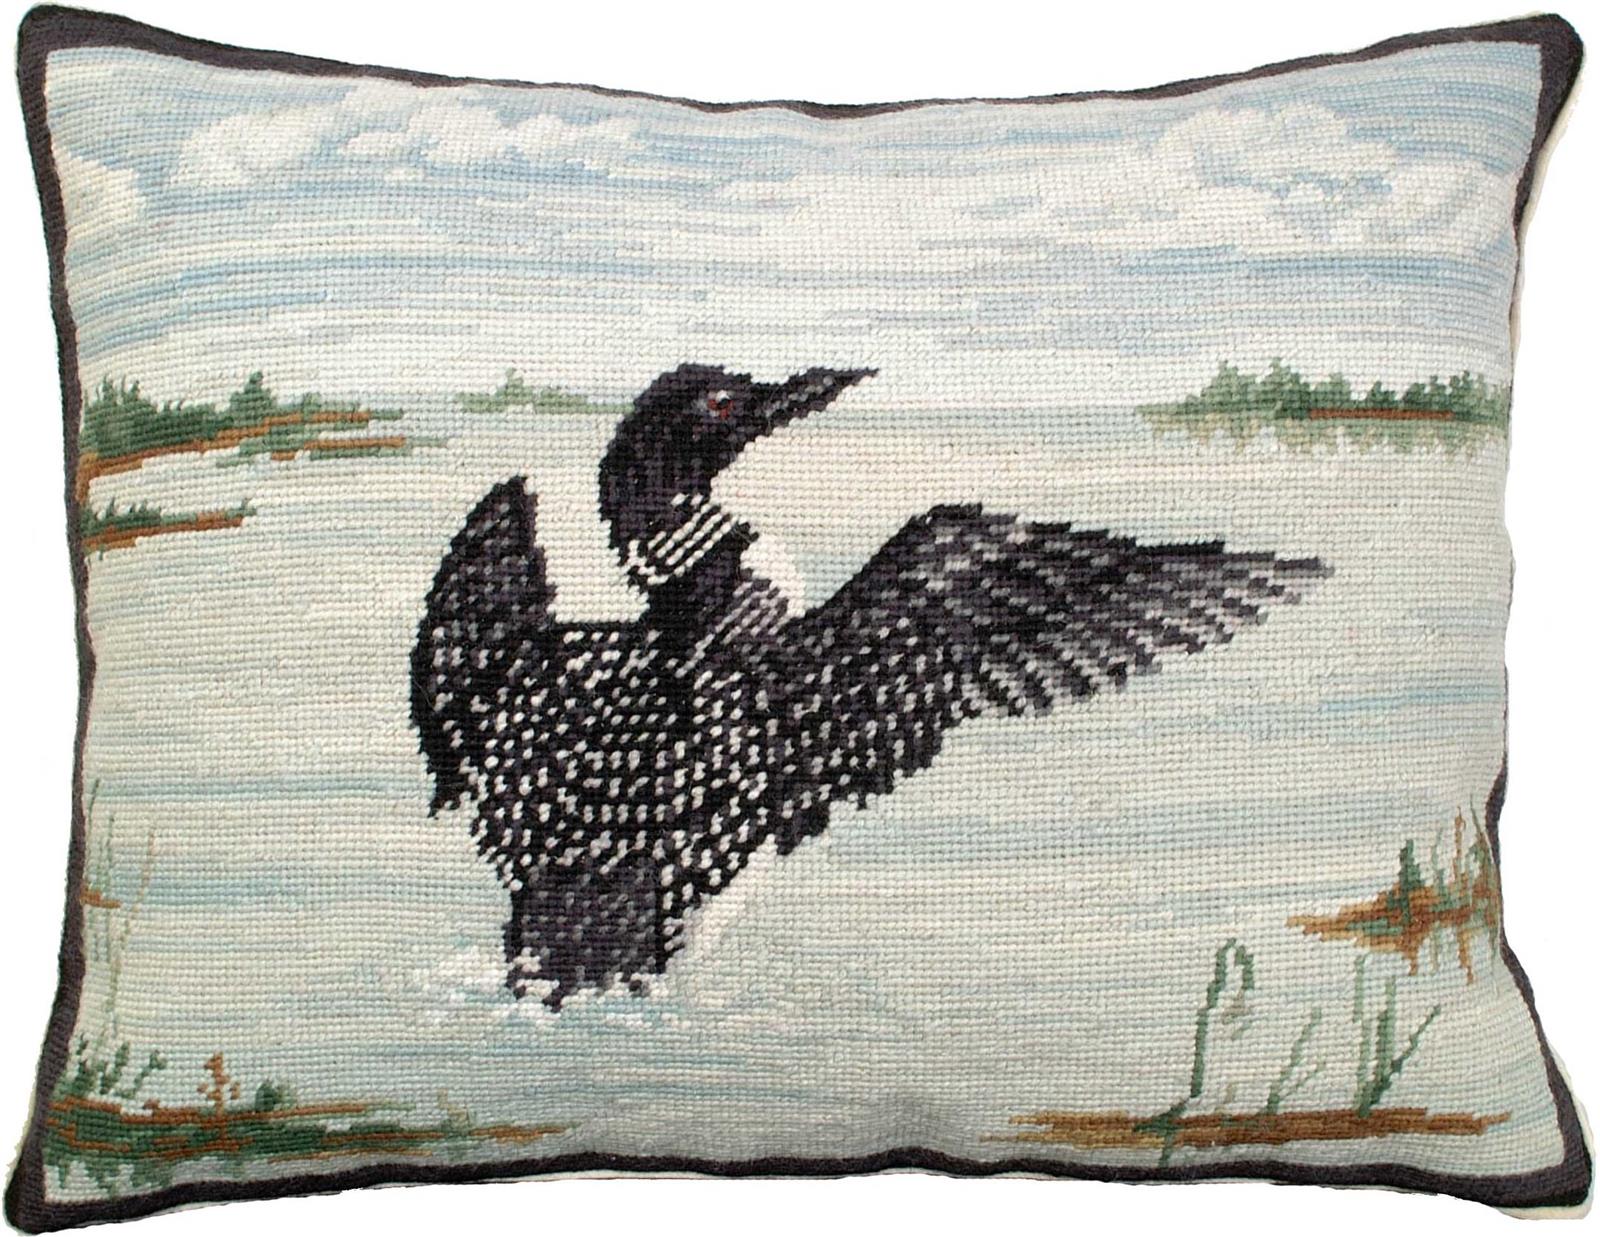 Throw Pillow Needlepoint Loon in Flight 16x20 20x16 Blue Red Black White Down-Image 1